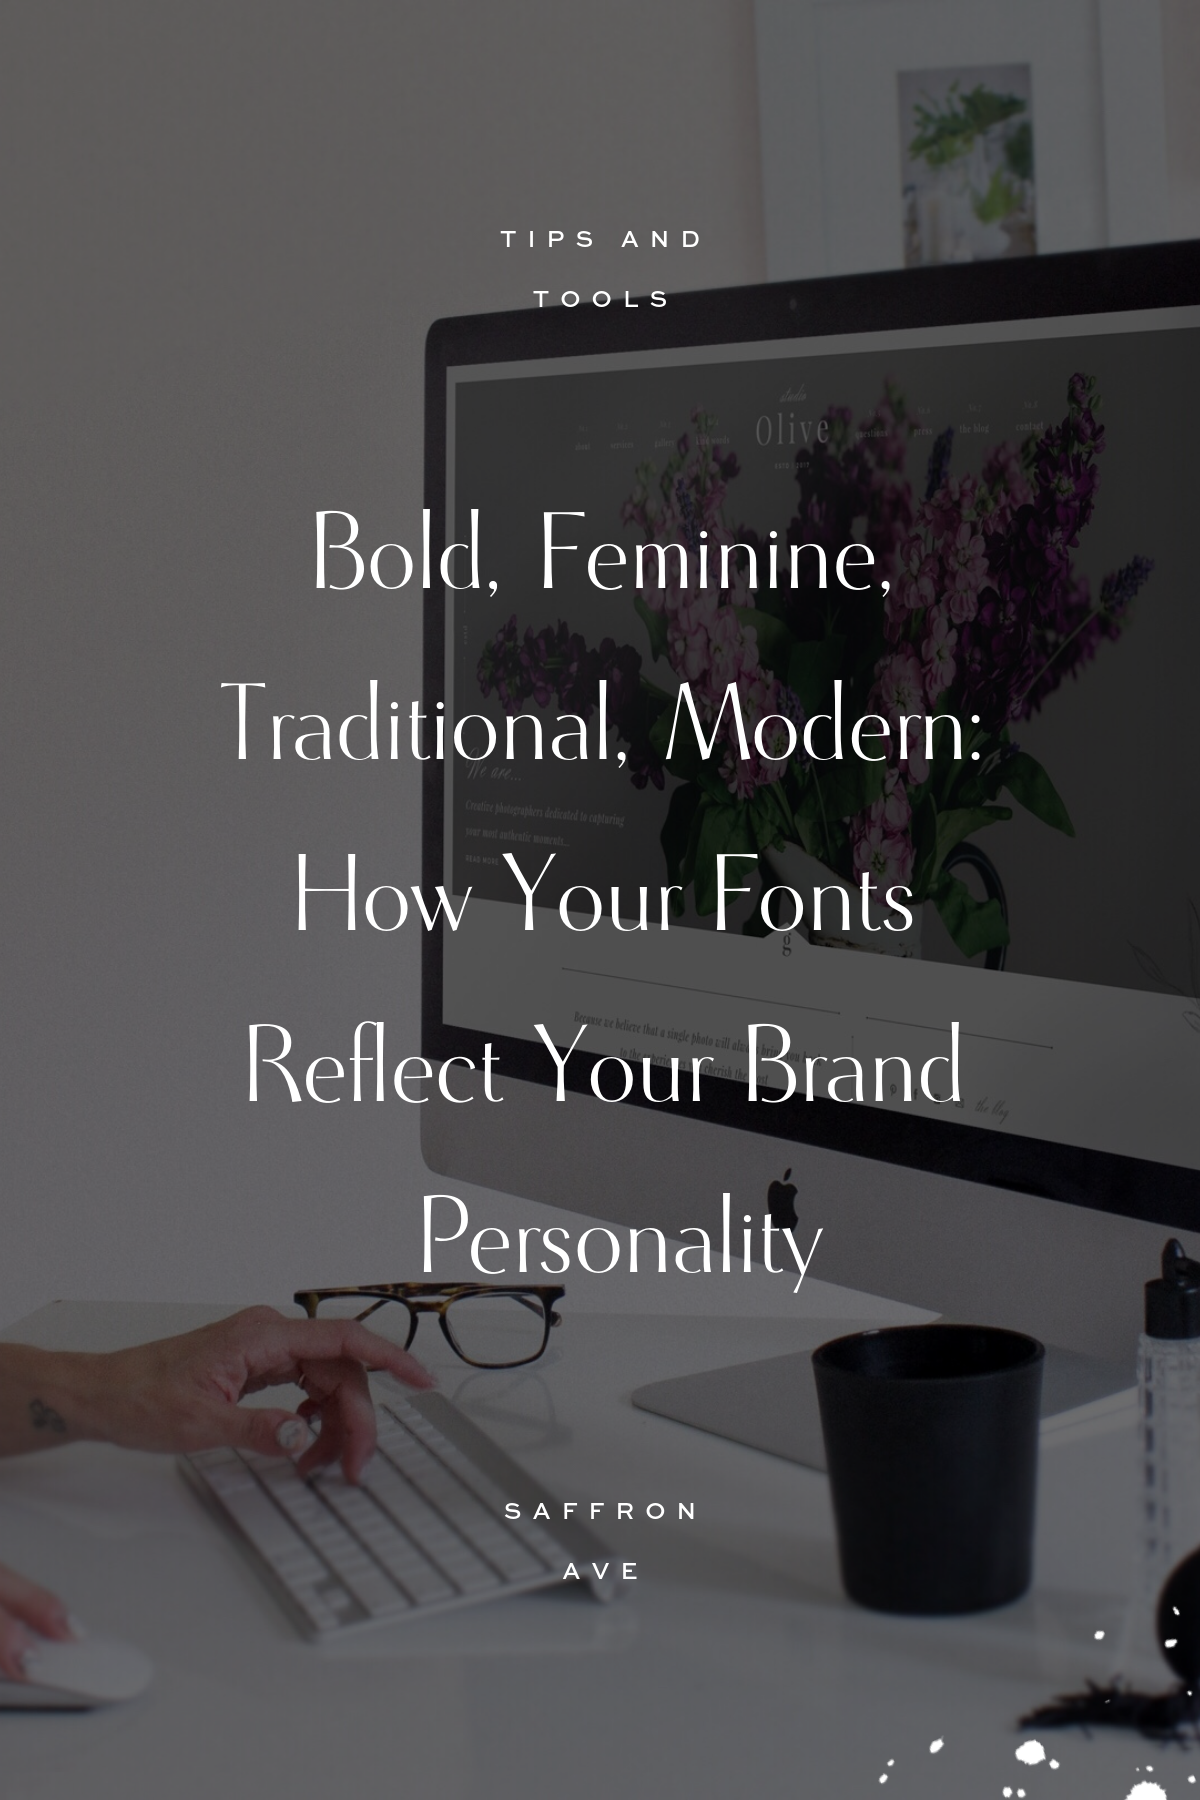 Choose Fonts That Reflect Your Brand Style and Font Psychology